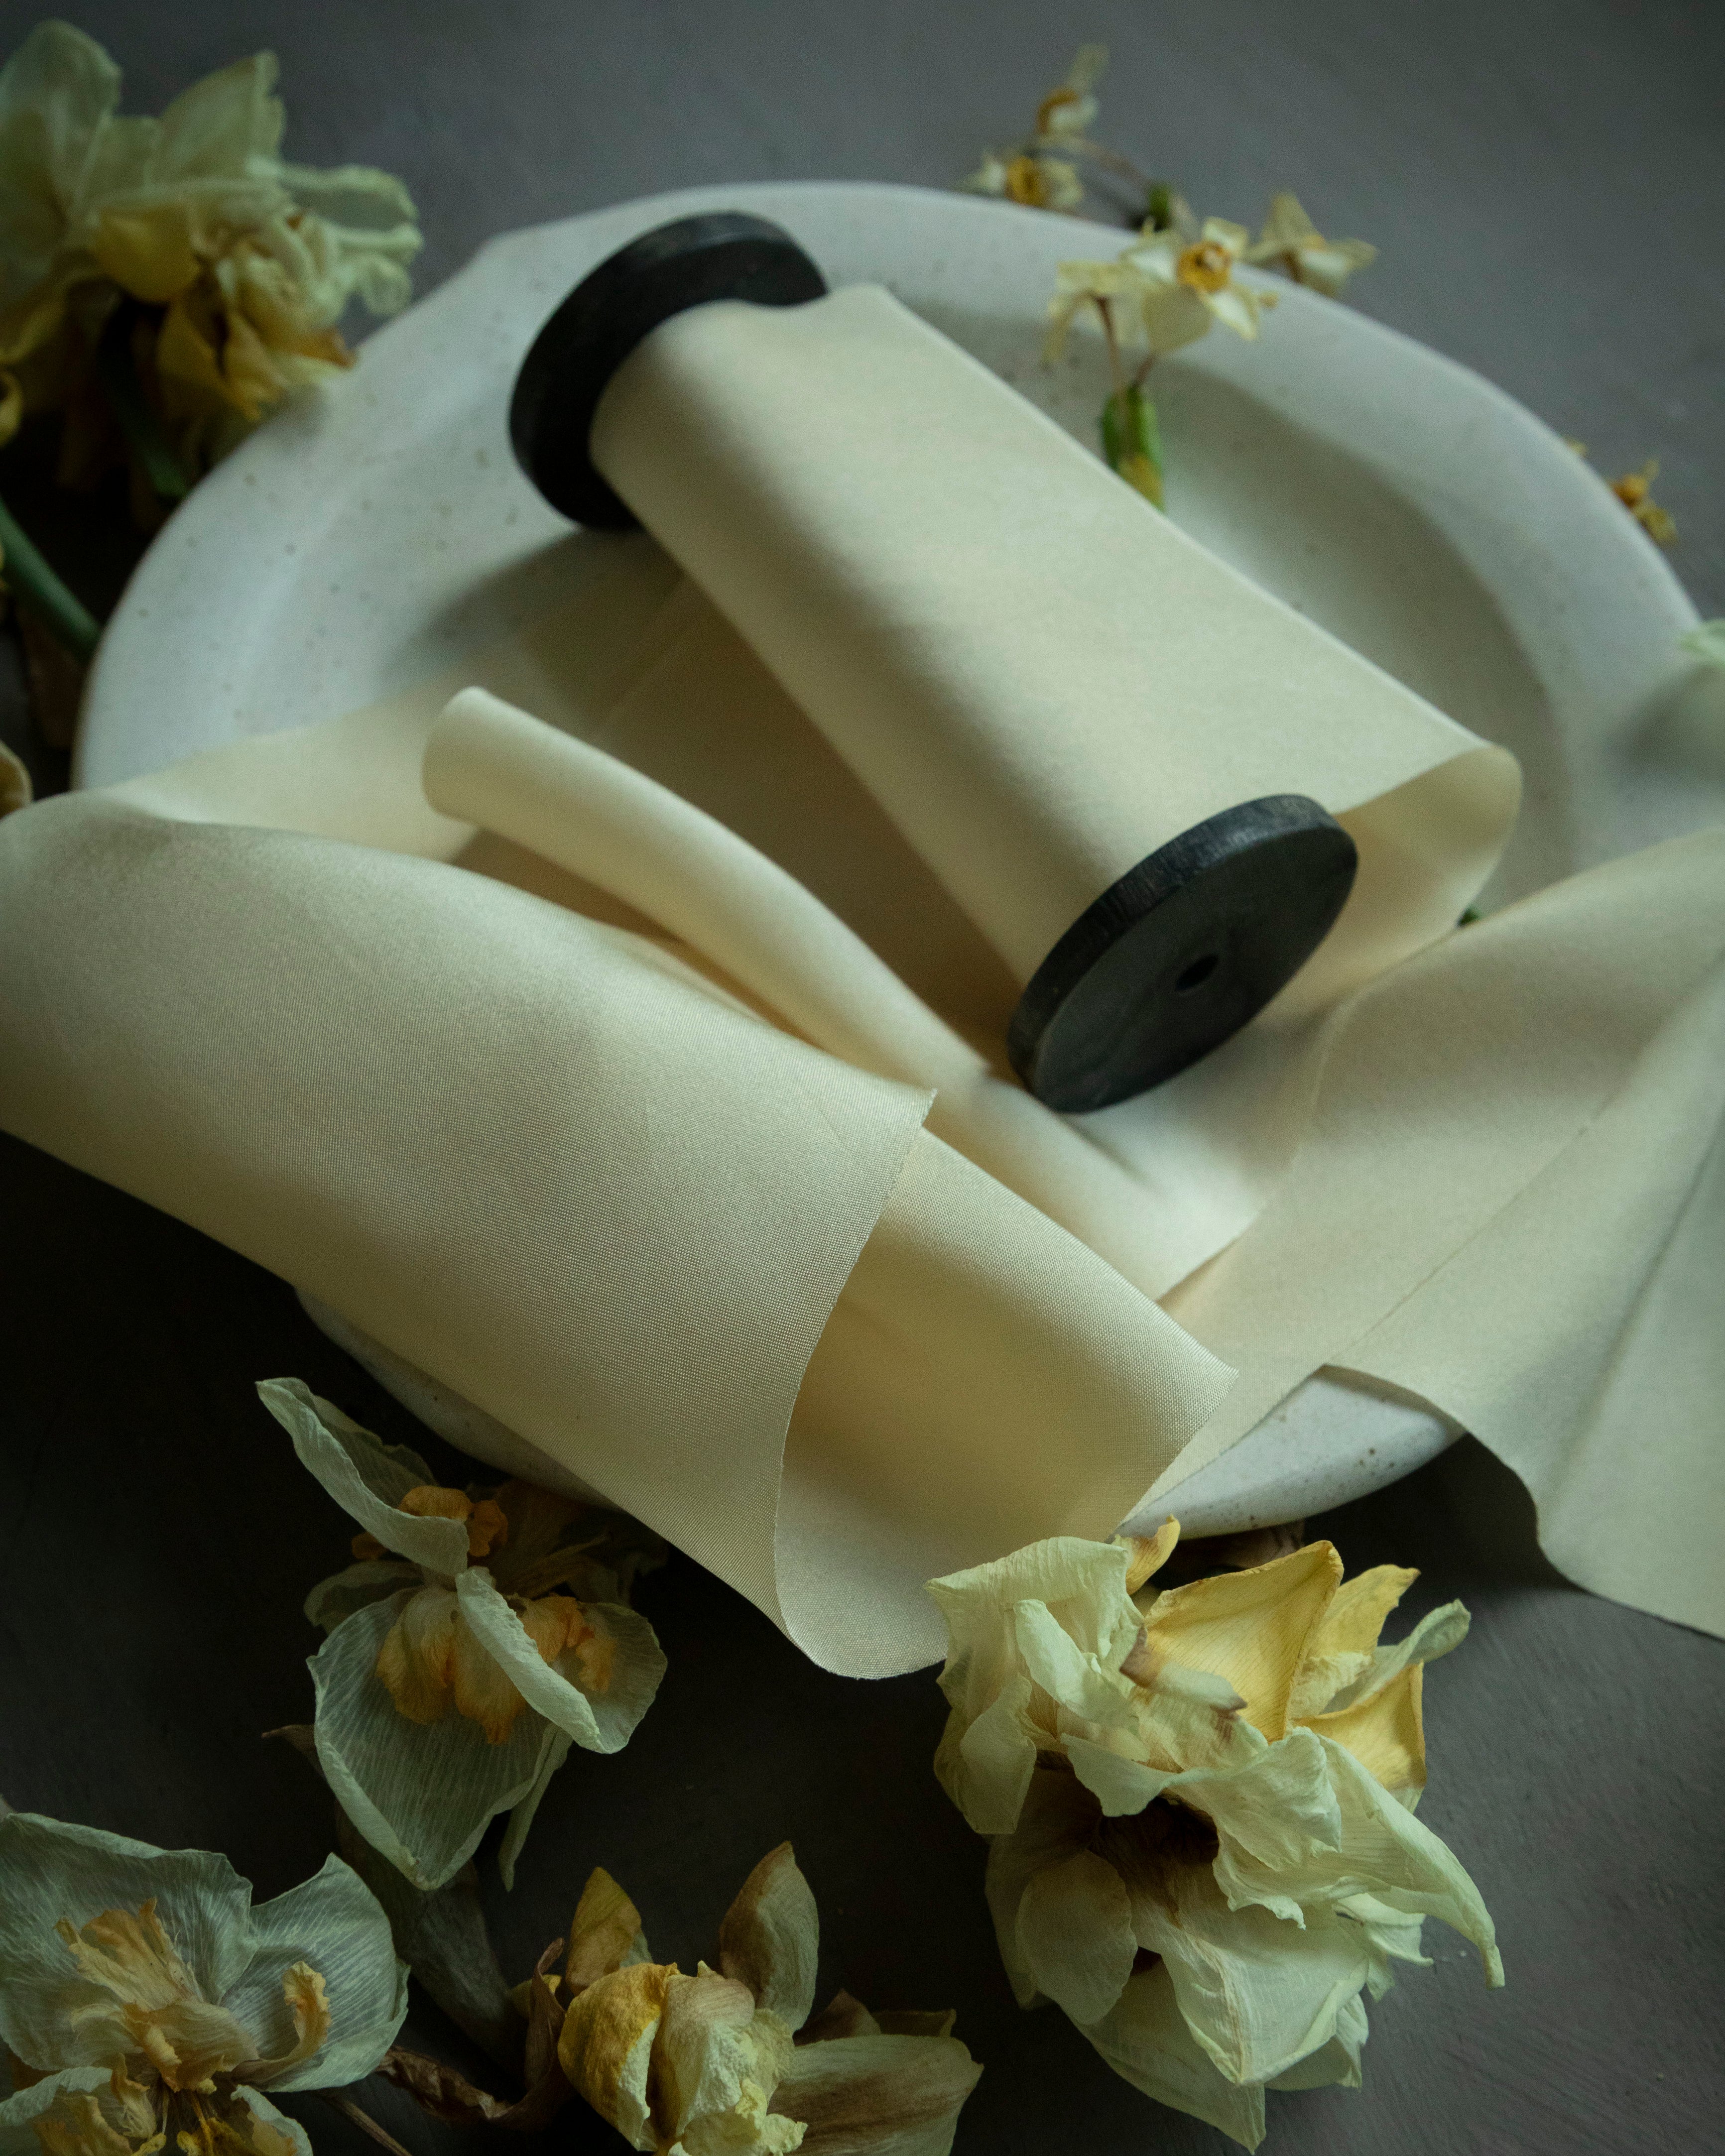 the highest quality silk ribbon is silk and willow botanical dyed silk ribbons